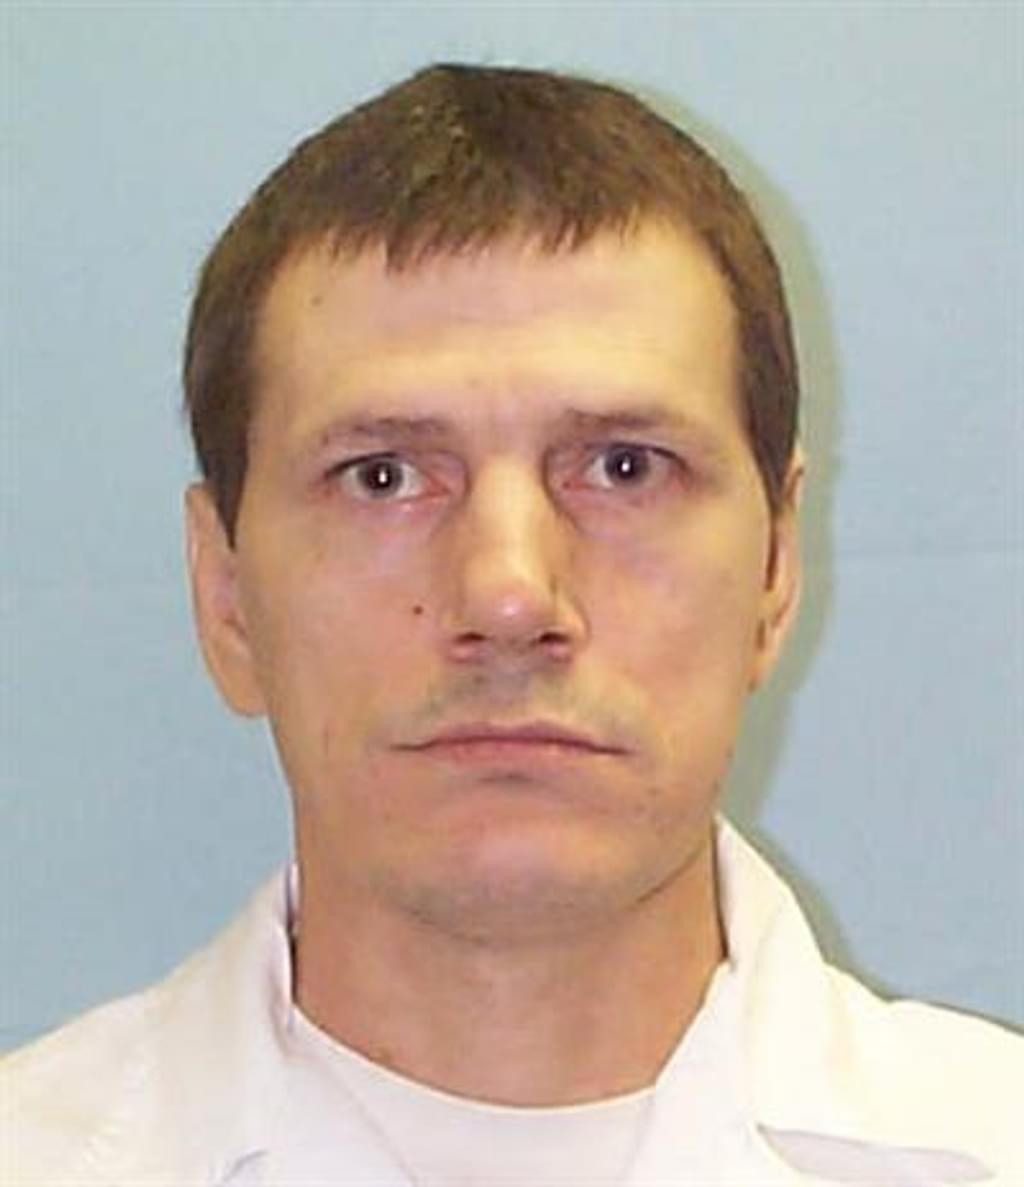 Alabama Cancels Cancer Surgery, Sets Execution Date for Terminally Ill Prisoner